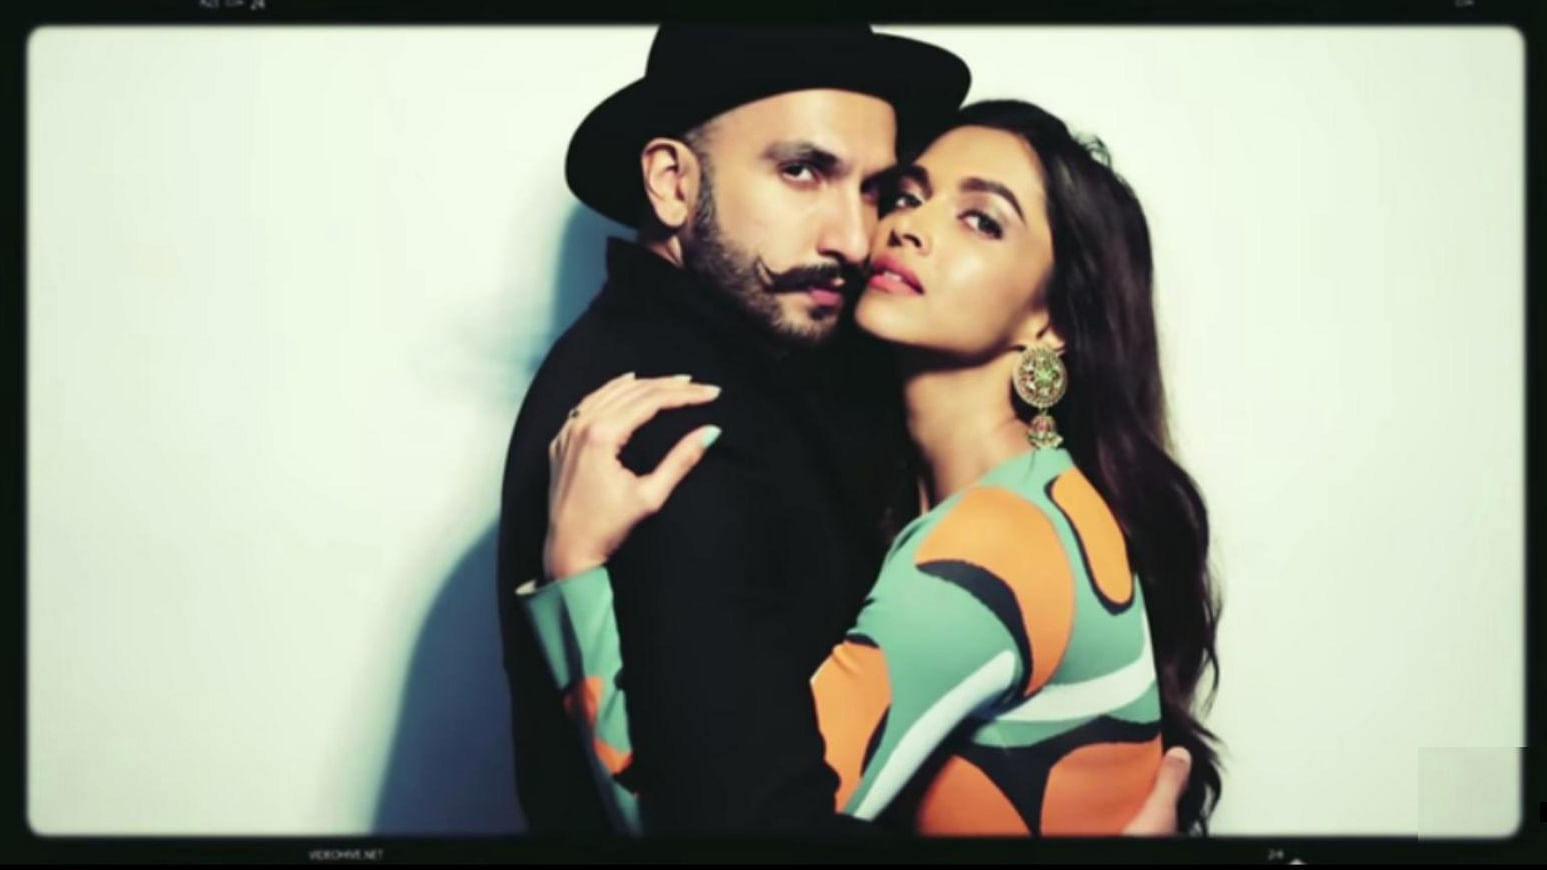 Ranveer and Deepika share sizzling chemistry at a&nbsp;Vogue photoshoot (Photo: <a href="https://www.youtube.com/watch?v=SUqdvlxUQxw">YouTube/vogueindia</a>)